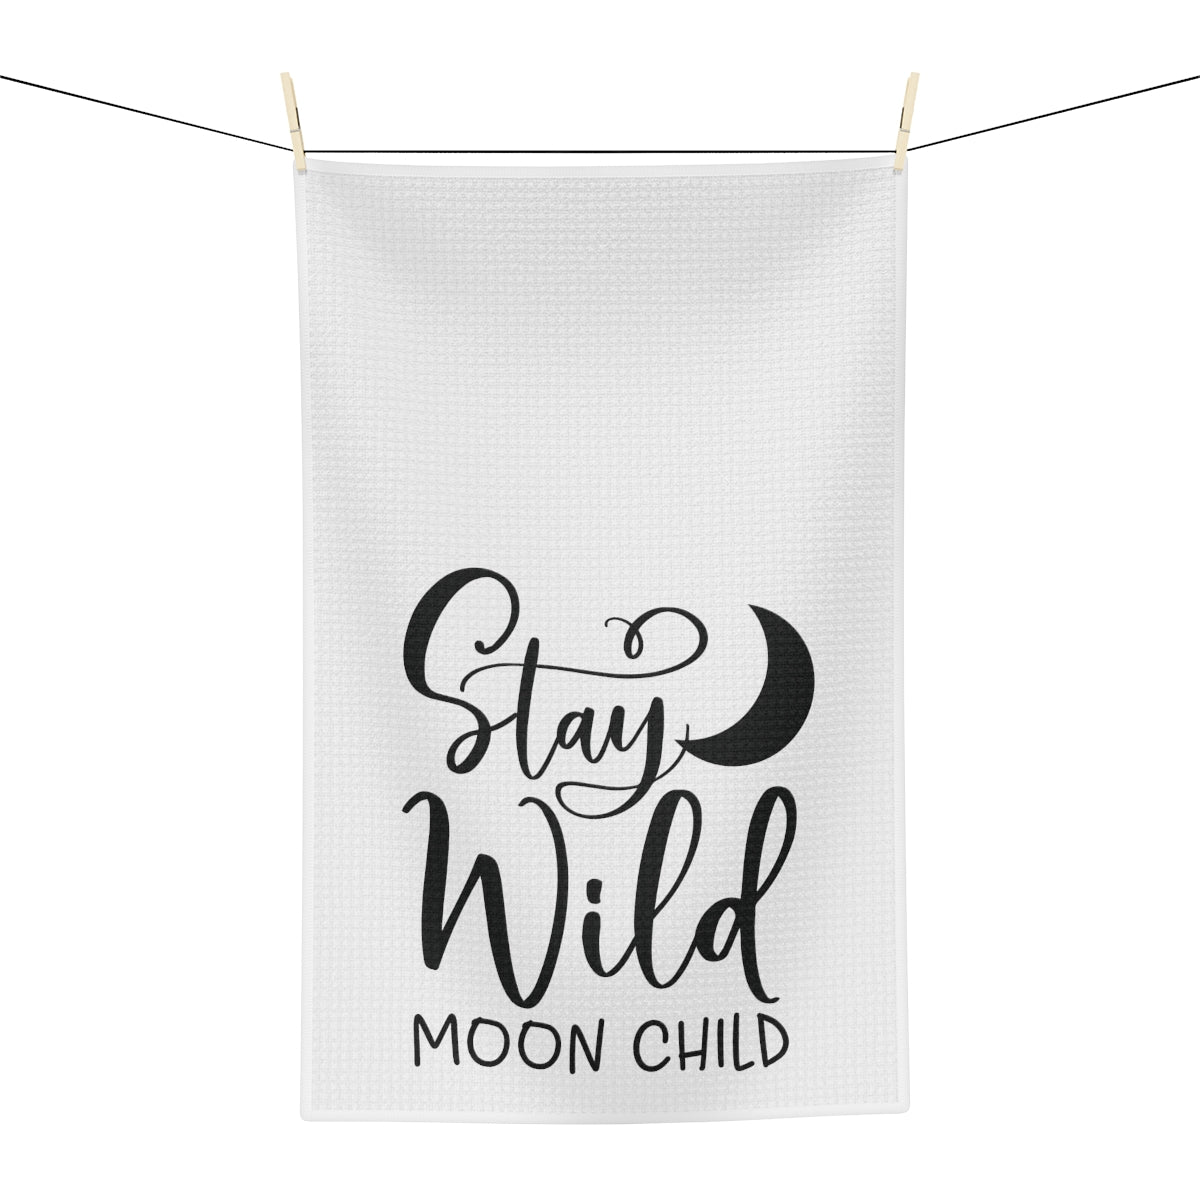 Stay Wild Moon Child Tea Towel - Witchy Kitchens